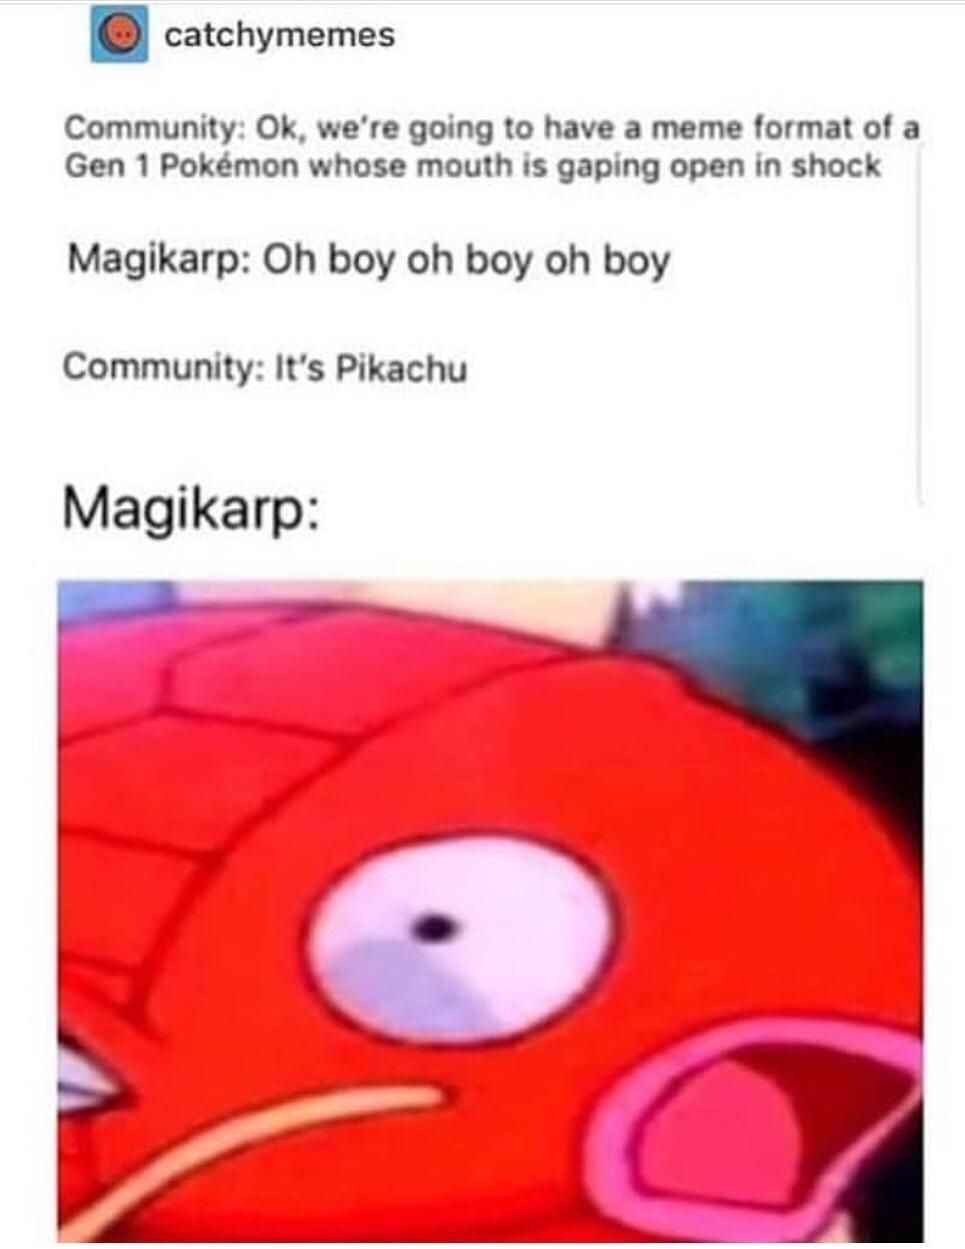 They really did Magikarp like that.